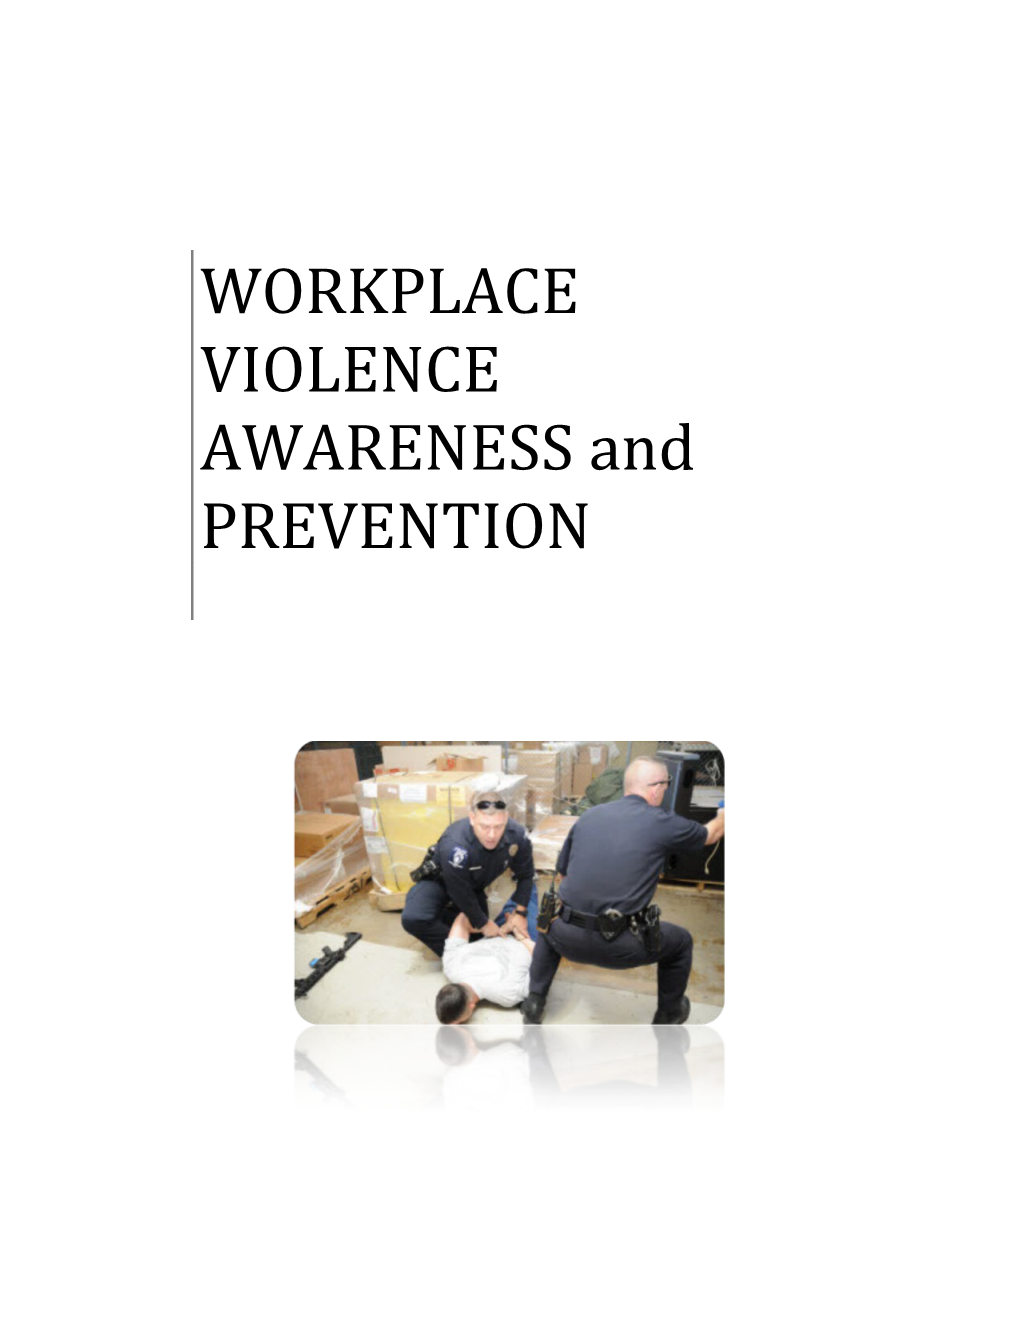 WORKPLACE VIOLENCE AWARENESS and PREVENTION